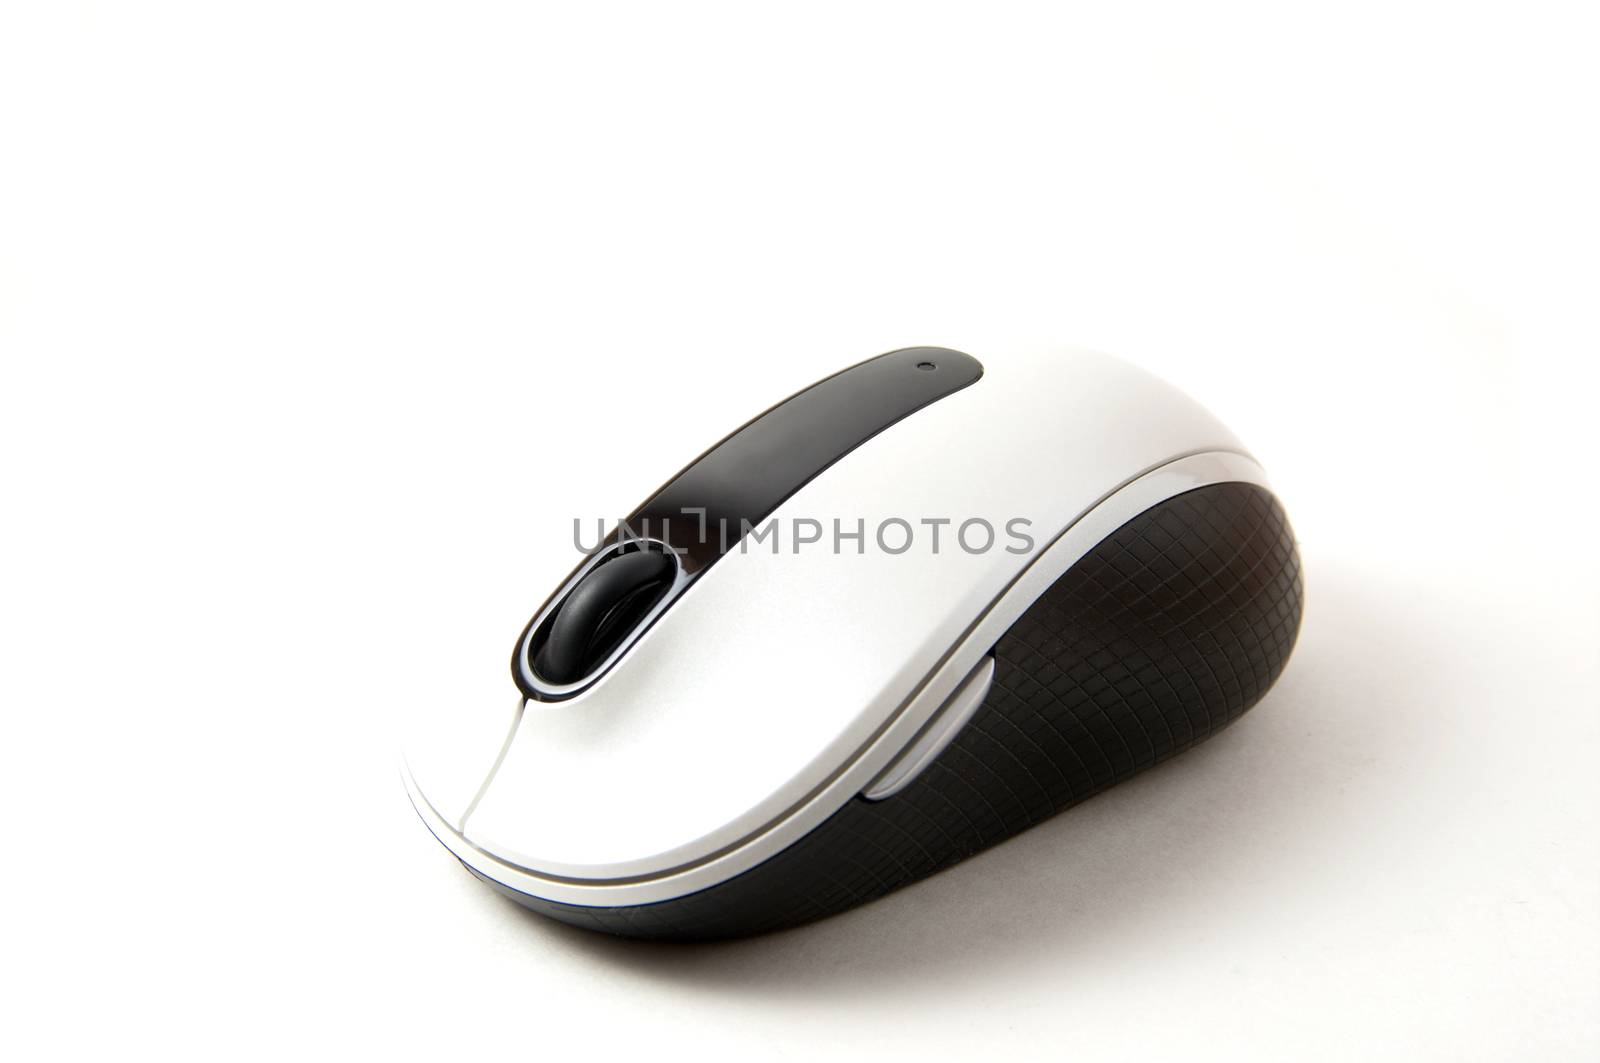 Wireless cordless mouse by daoleduc